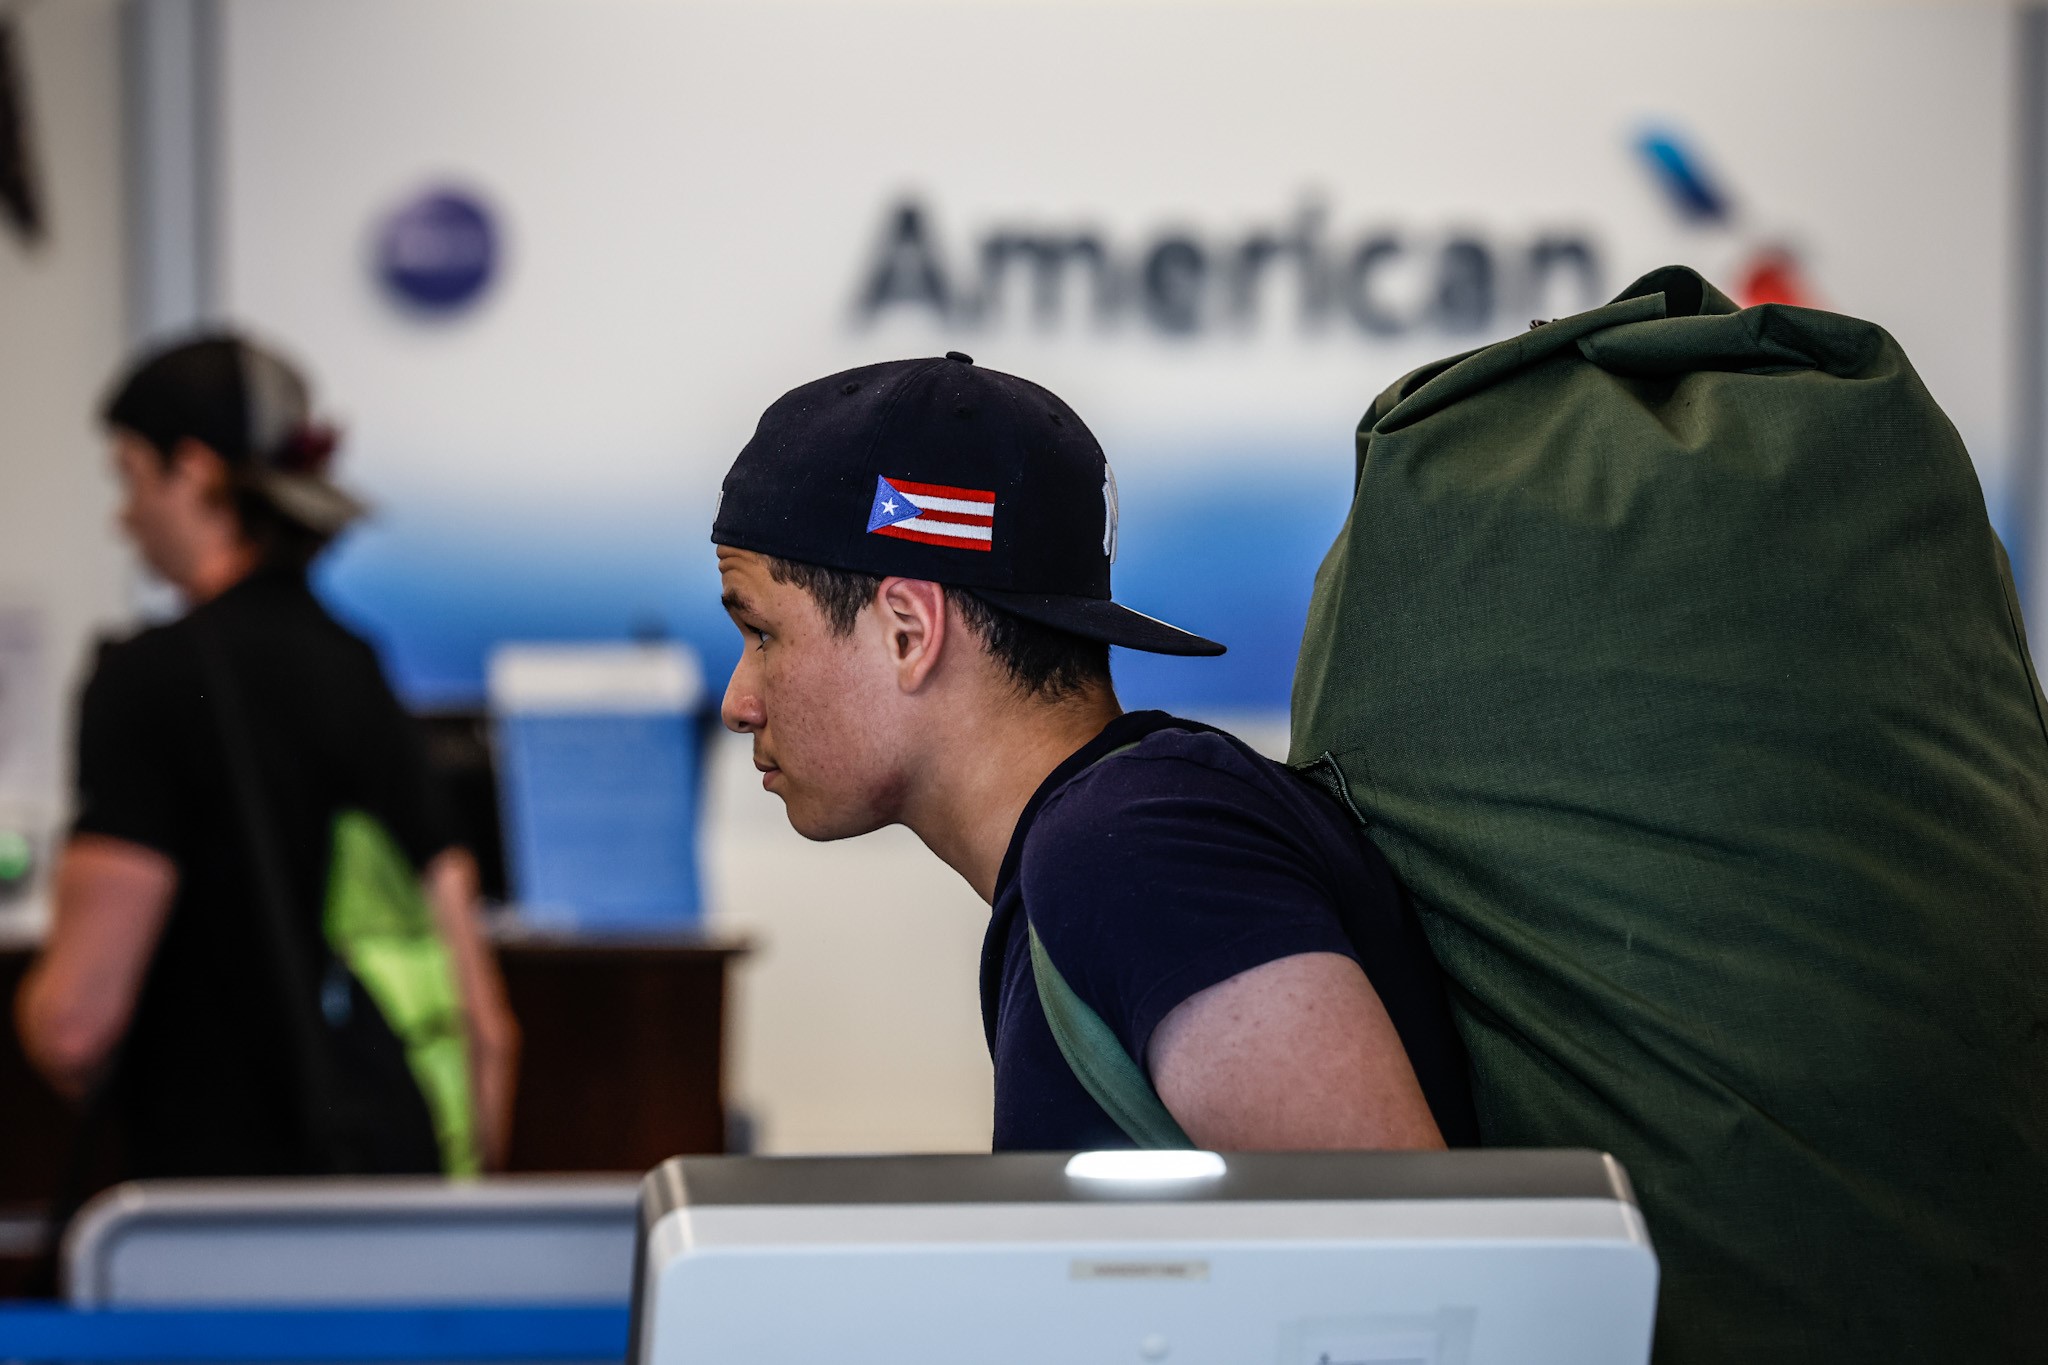 Pedro Figueroa, from the Bronx in New York City, waits inline at American Airlines ticket counter at the Dayton International Airport Friday July 15, 2022. JIM NOELKER / STAFF